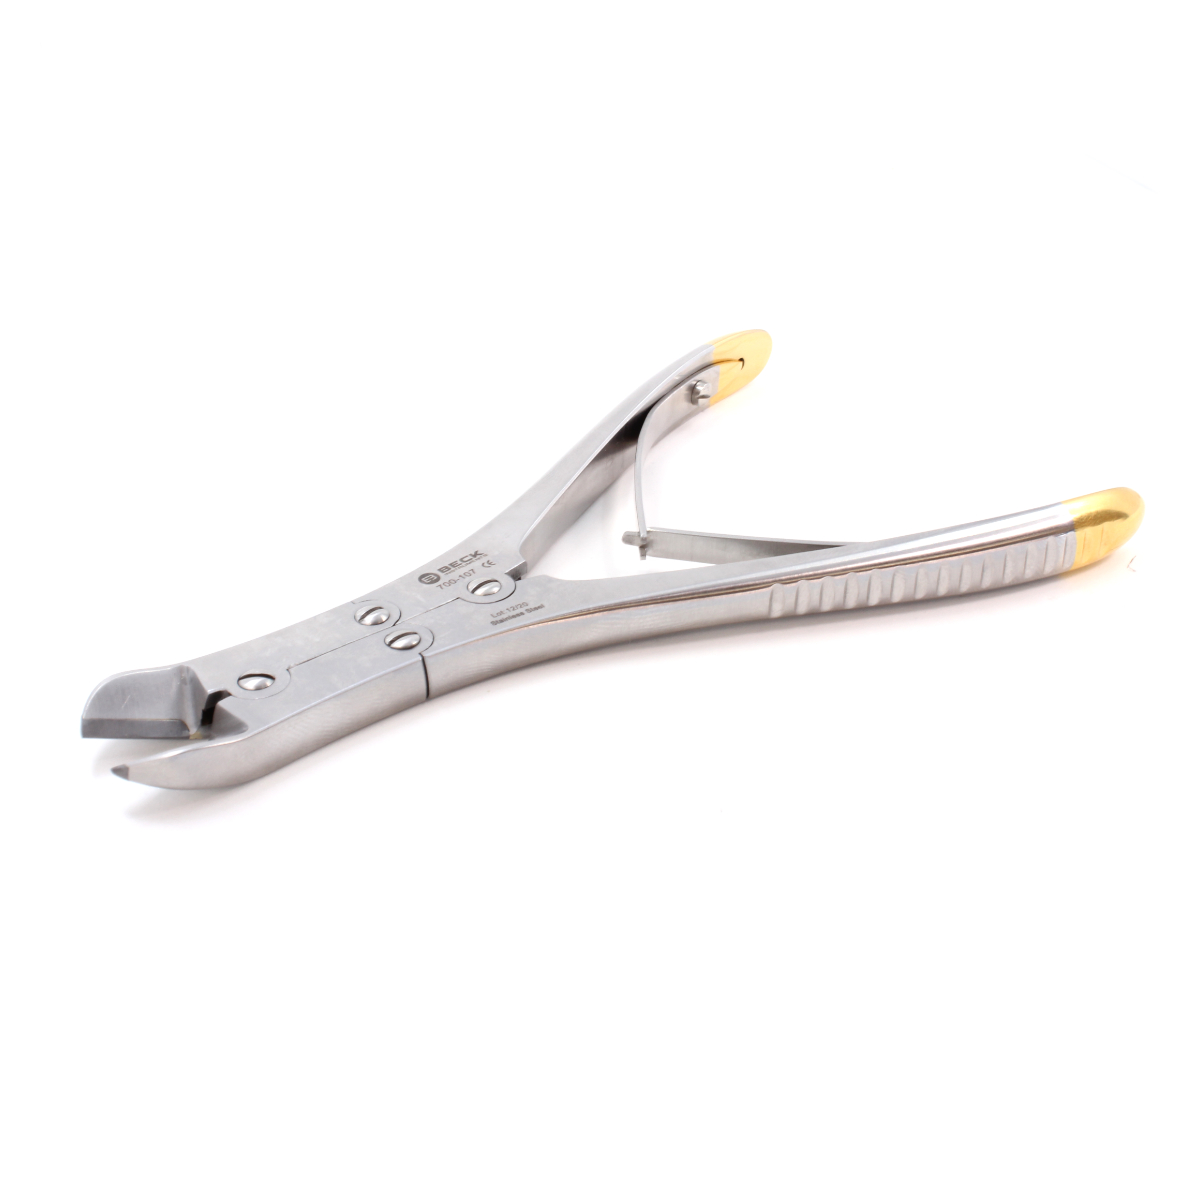 Extra Heavy Wire Cutter - TC